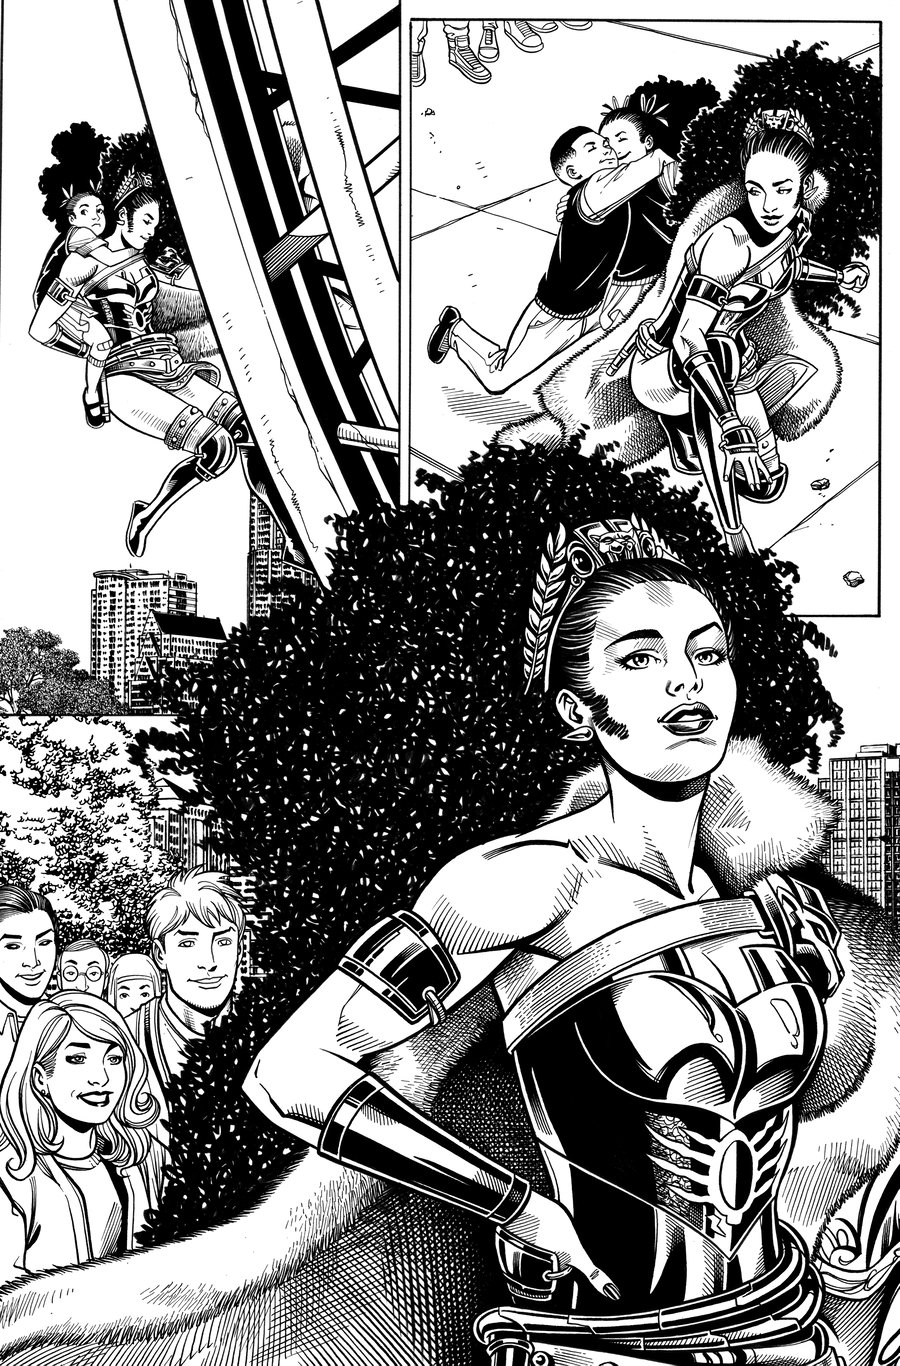 Image of Nubia and the Justice League #1 PG 9